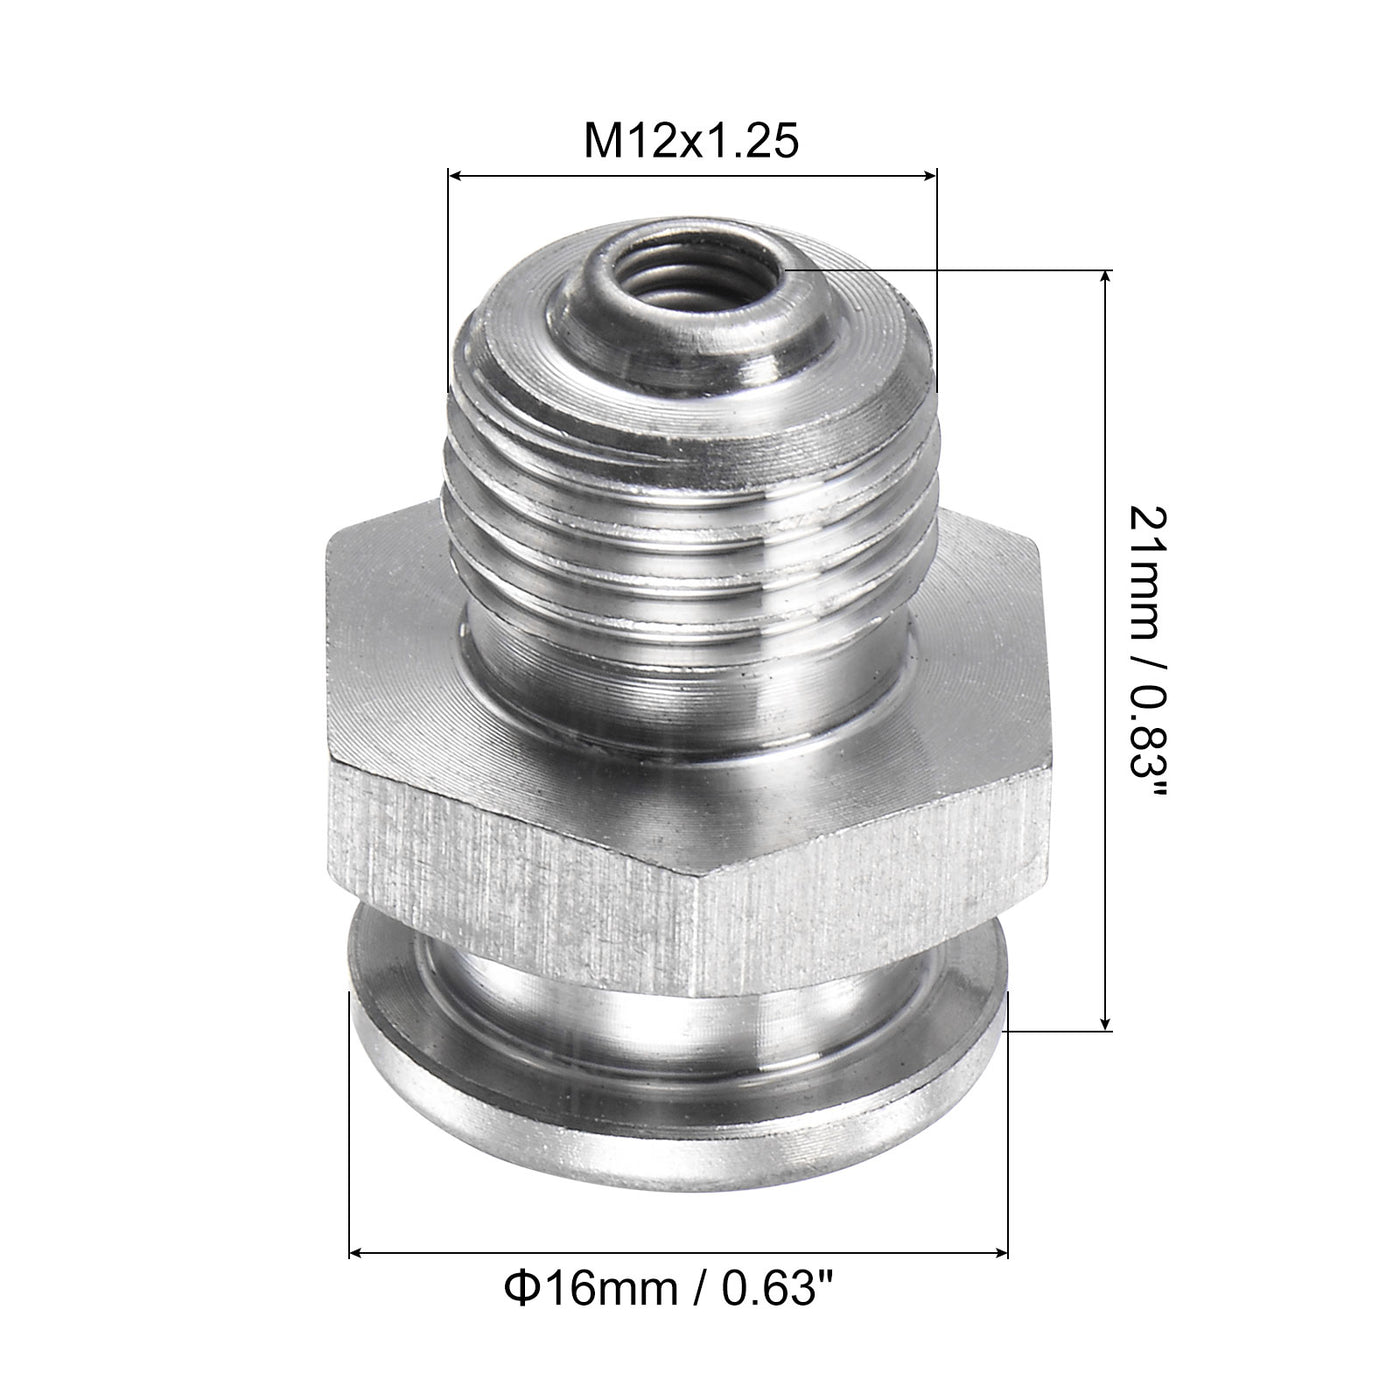 Uxcell Uxcell Push Button Grease Oil Cup M10x1 Male Thread 304 Stainless Steel Ball Oiler